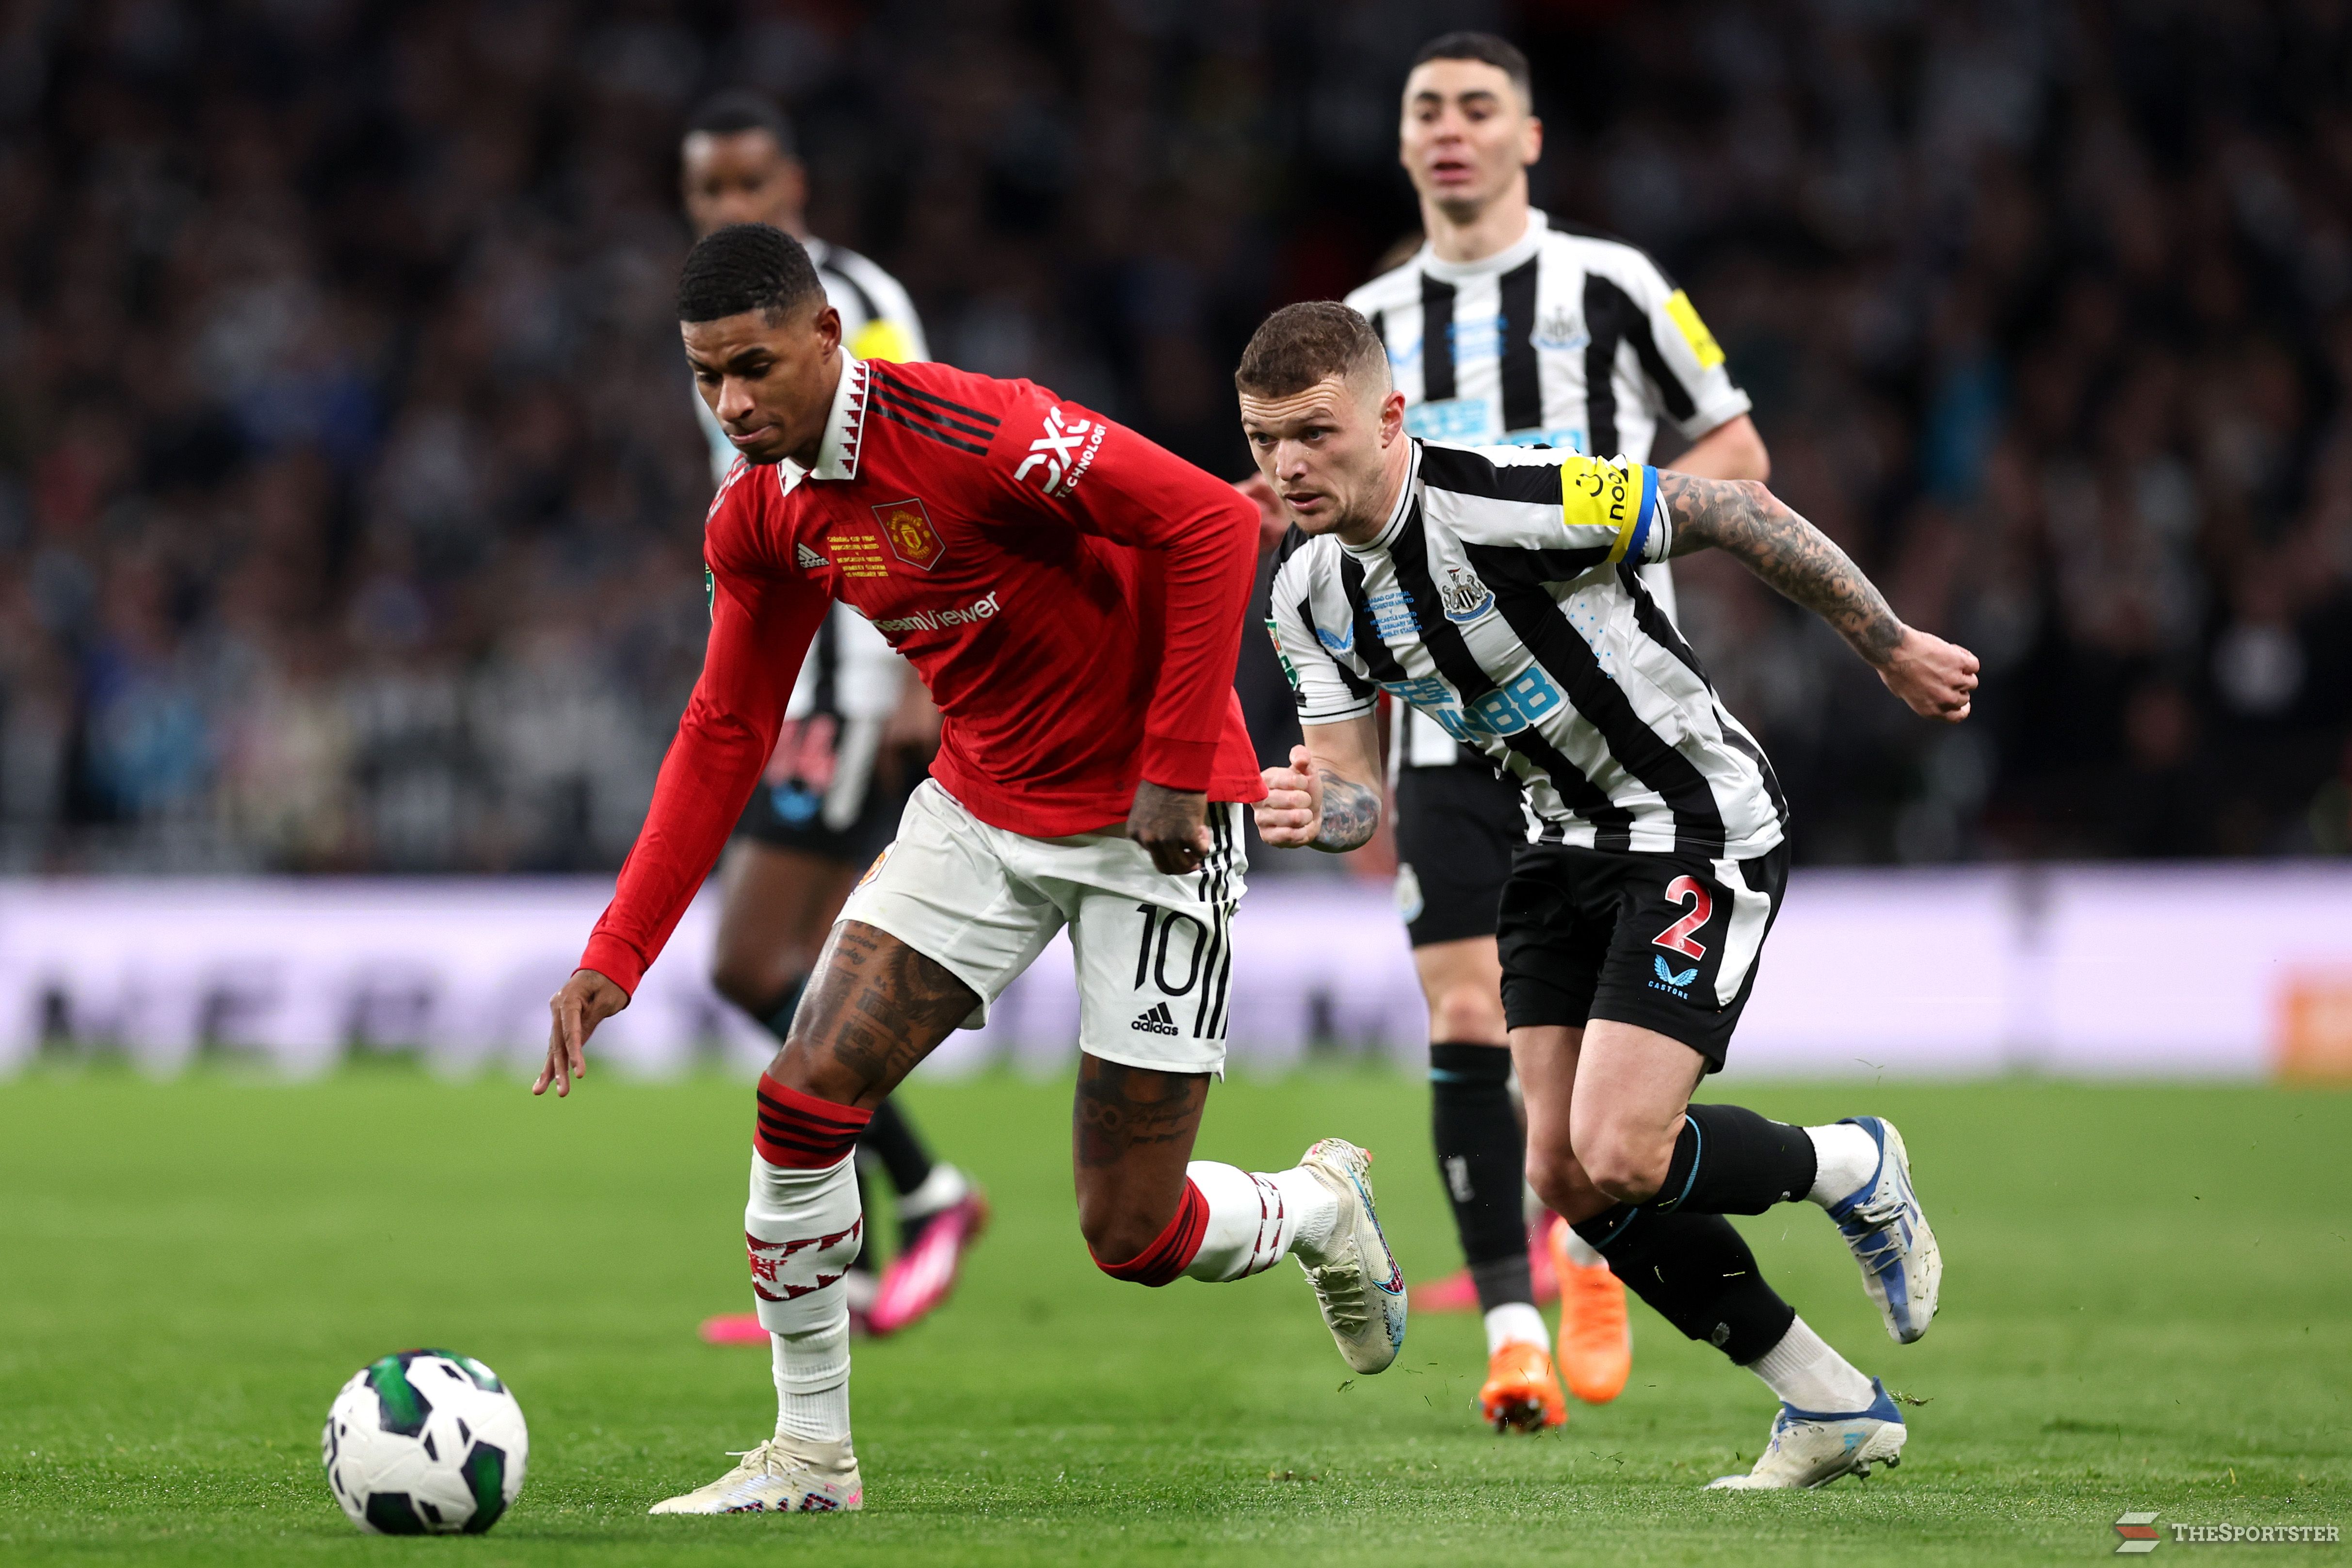 LONDON, ENGLAND - FEBRUARY 26: Marcus Rashford of Manchester United breaks away from Kieran Trippier of Newcastle United during the Carabao Cup Final match between Manchester United and Newcastle United at Wembley Stadium on February 26, 2023 in London, England. (Photo by Julian Finney/Getty Images)